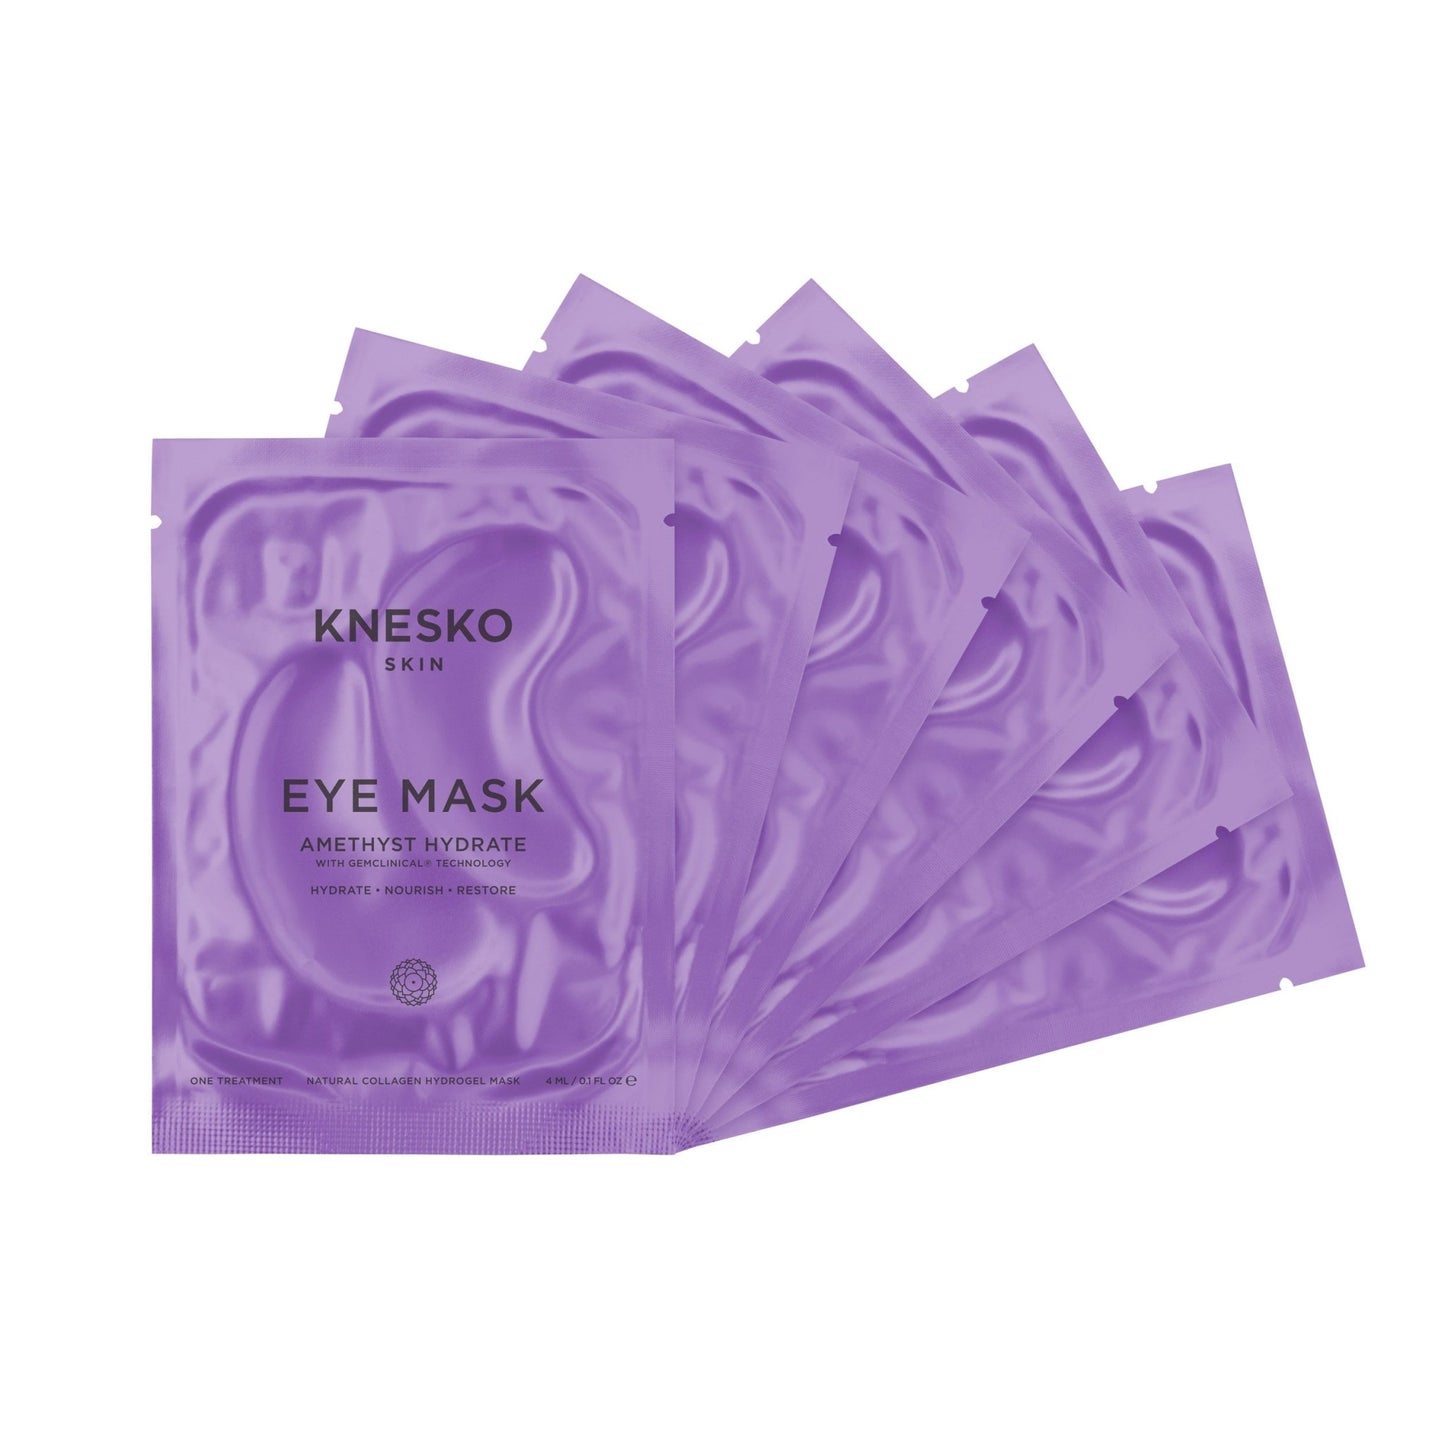 Buy Online Best Amethyst Eye Mask Treatments - 6 Treatments | Buy innovative clinical skincare products - TOPBODY